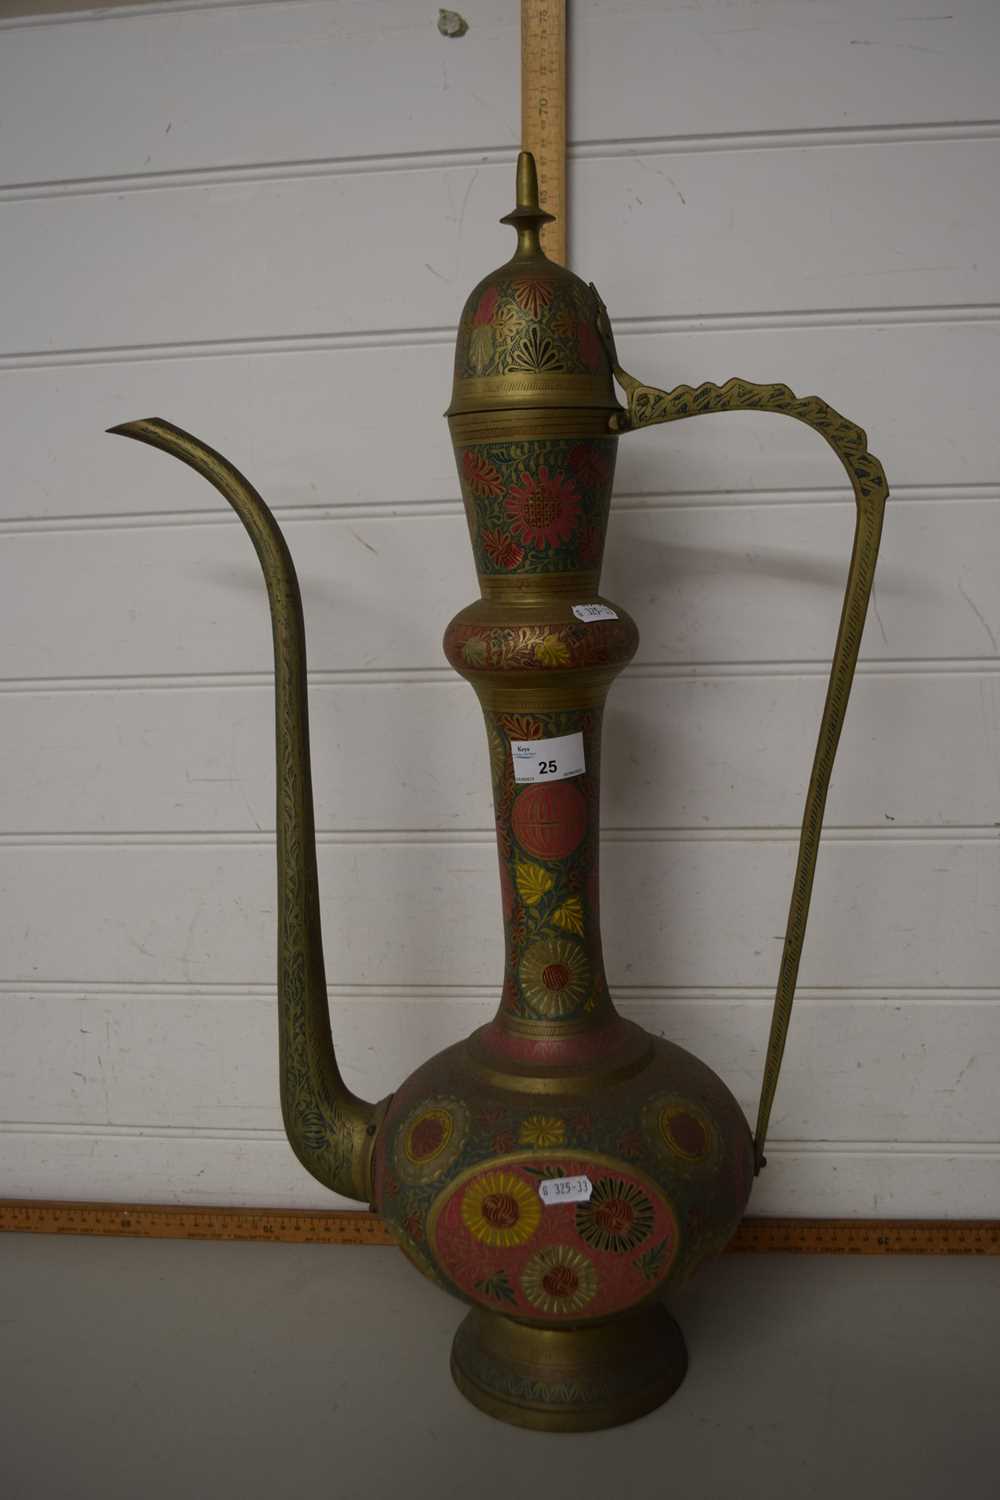 Middle Eastern styled ewer with polychrome finish and hinged lid